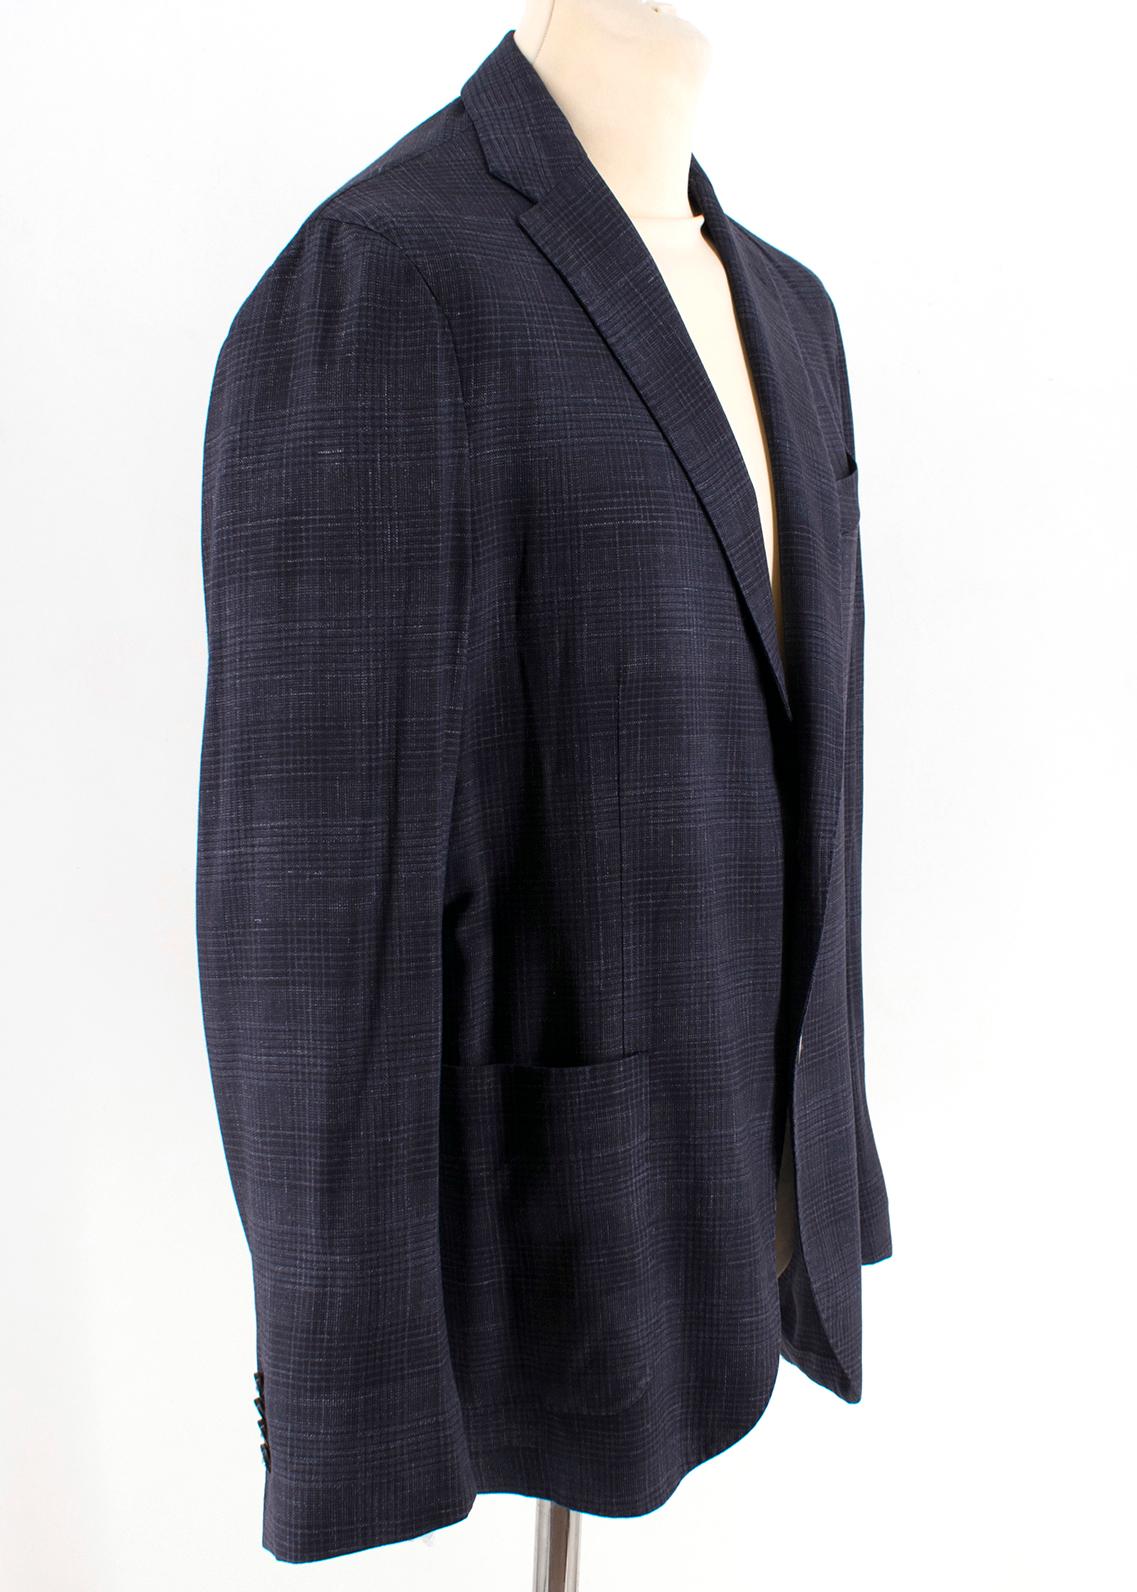 Boglioli Wool Blend Men's Single Breasted Blazer Jacket 

Soft wool blend blazer jacket in navy blue, 
Single breasted with standard notch lapel collar, 
Check design throughout,
Long sleeves, 
Lightweight,
Two front pockets, 
Left chest welt